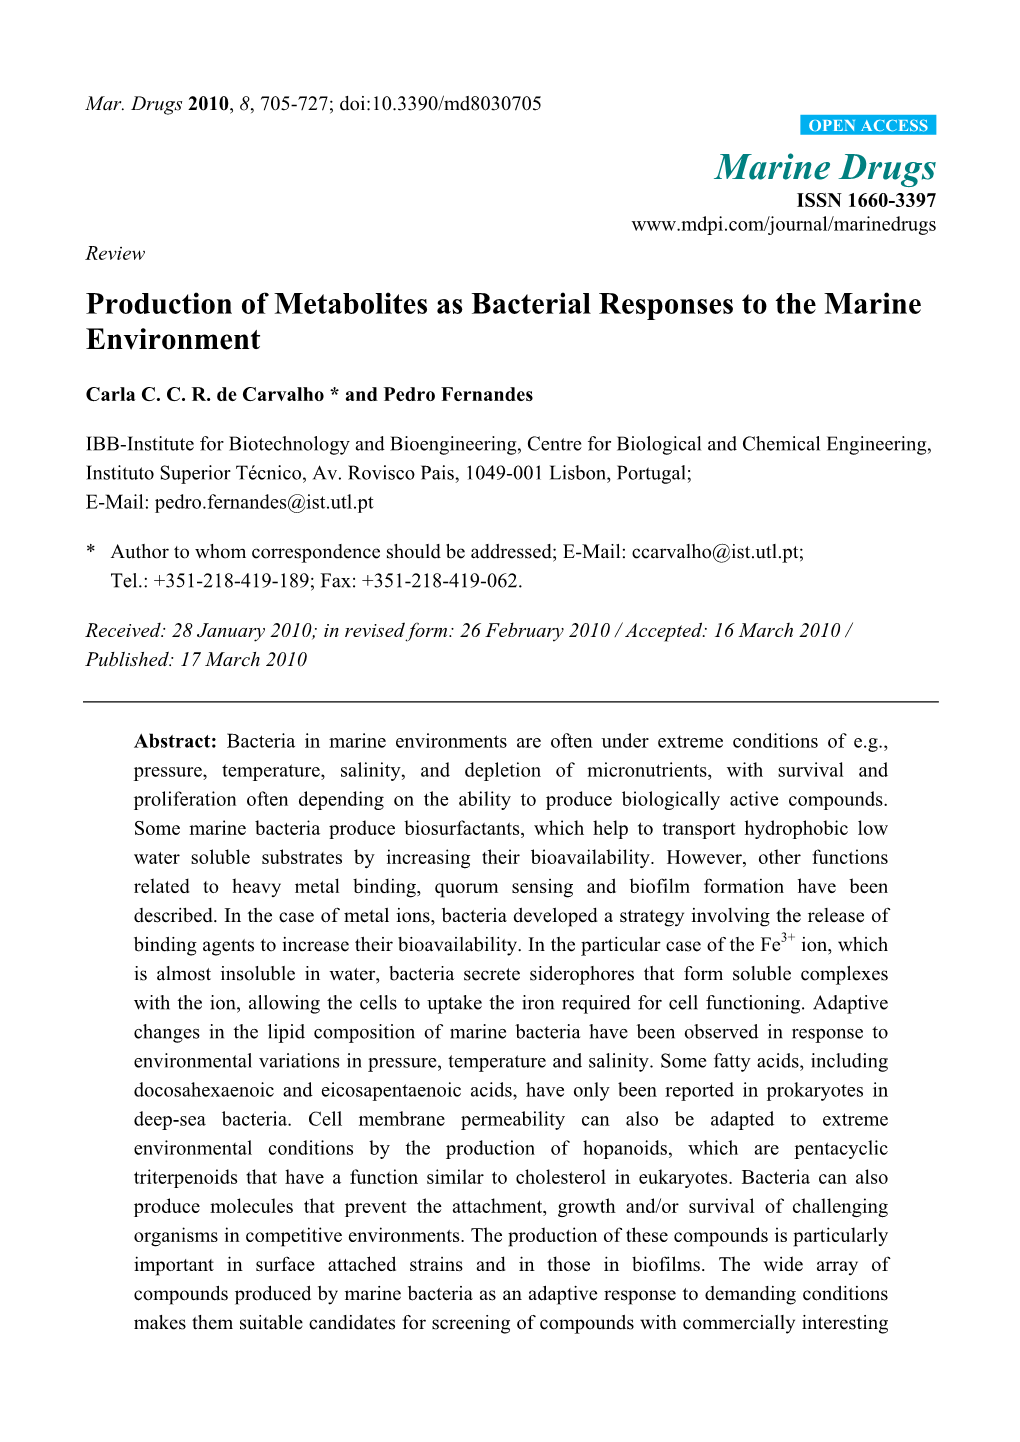 Production of Metabolites As Bacterial Responses to the Marine Environment